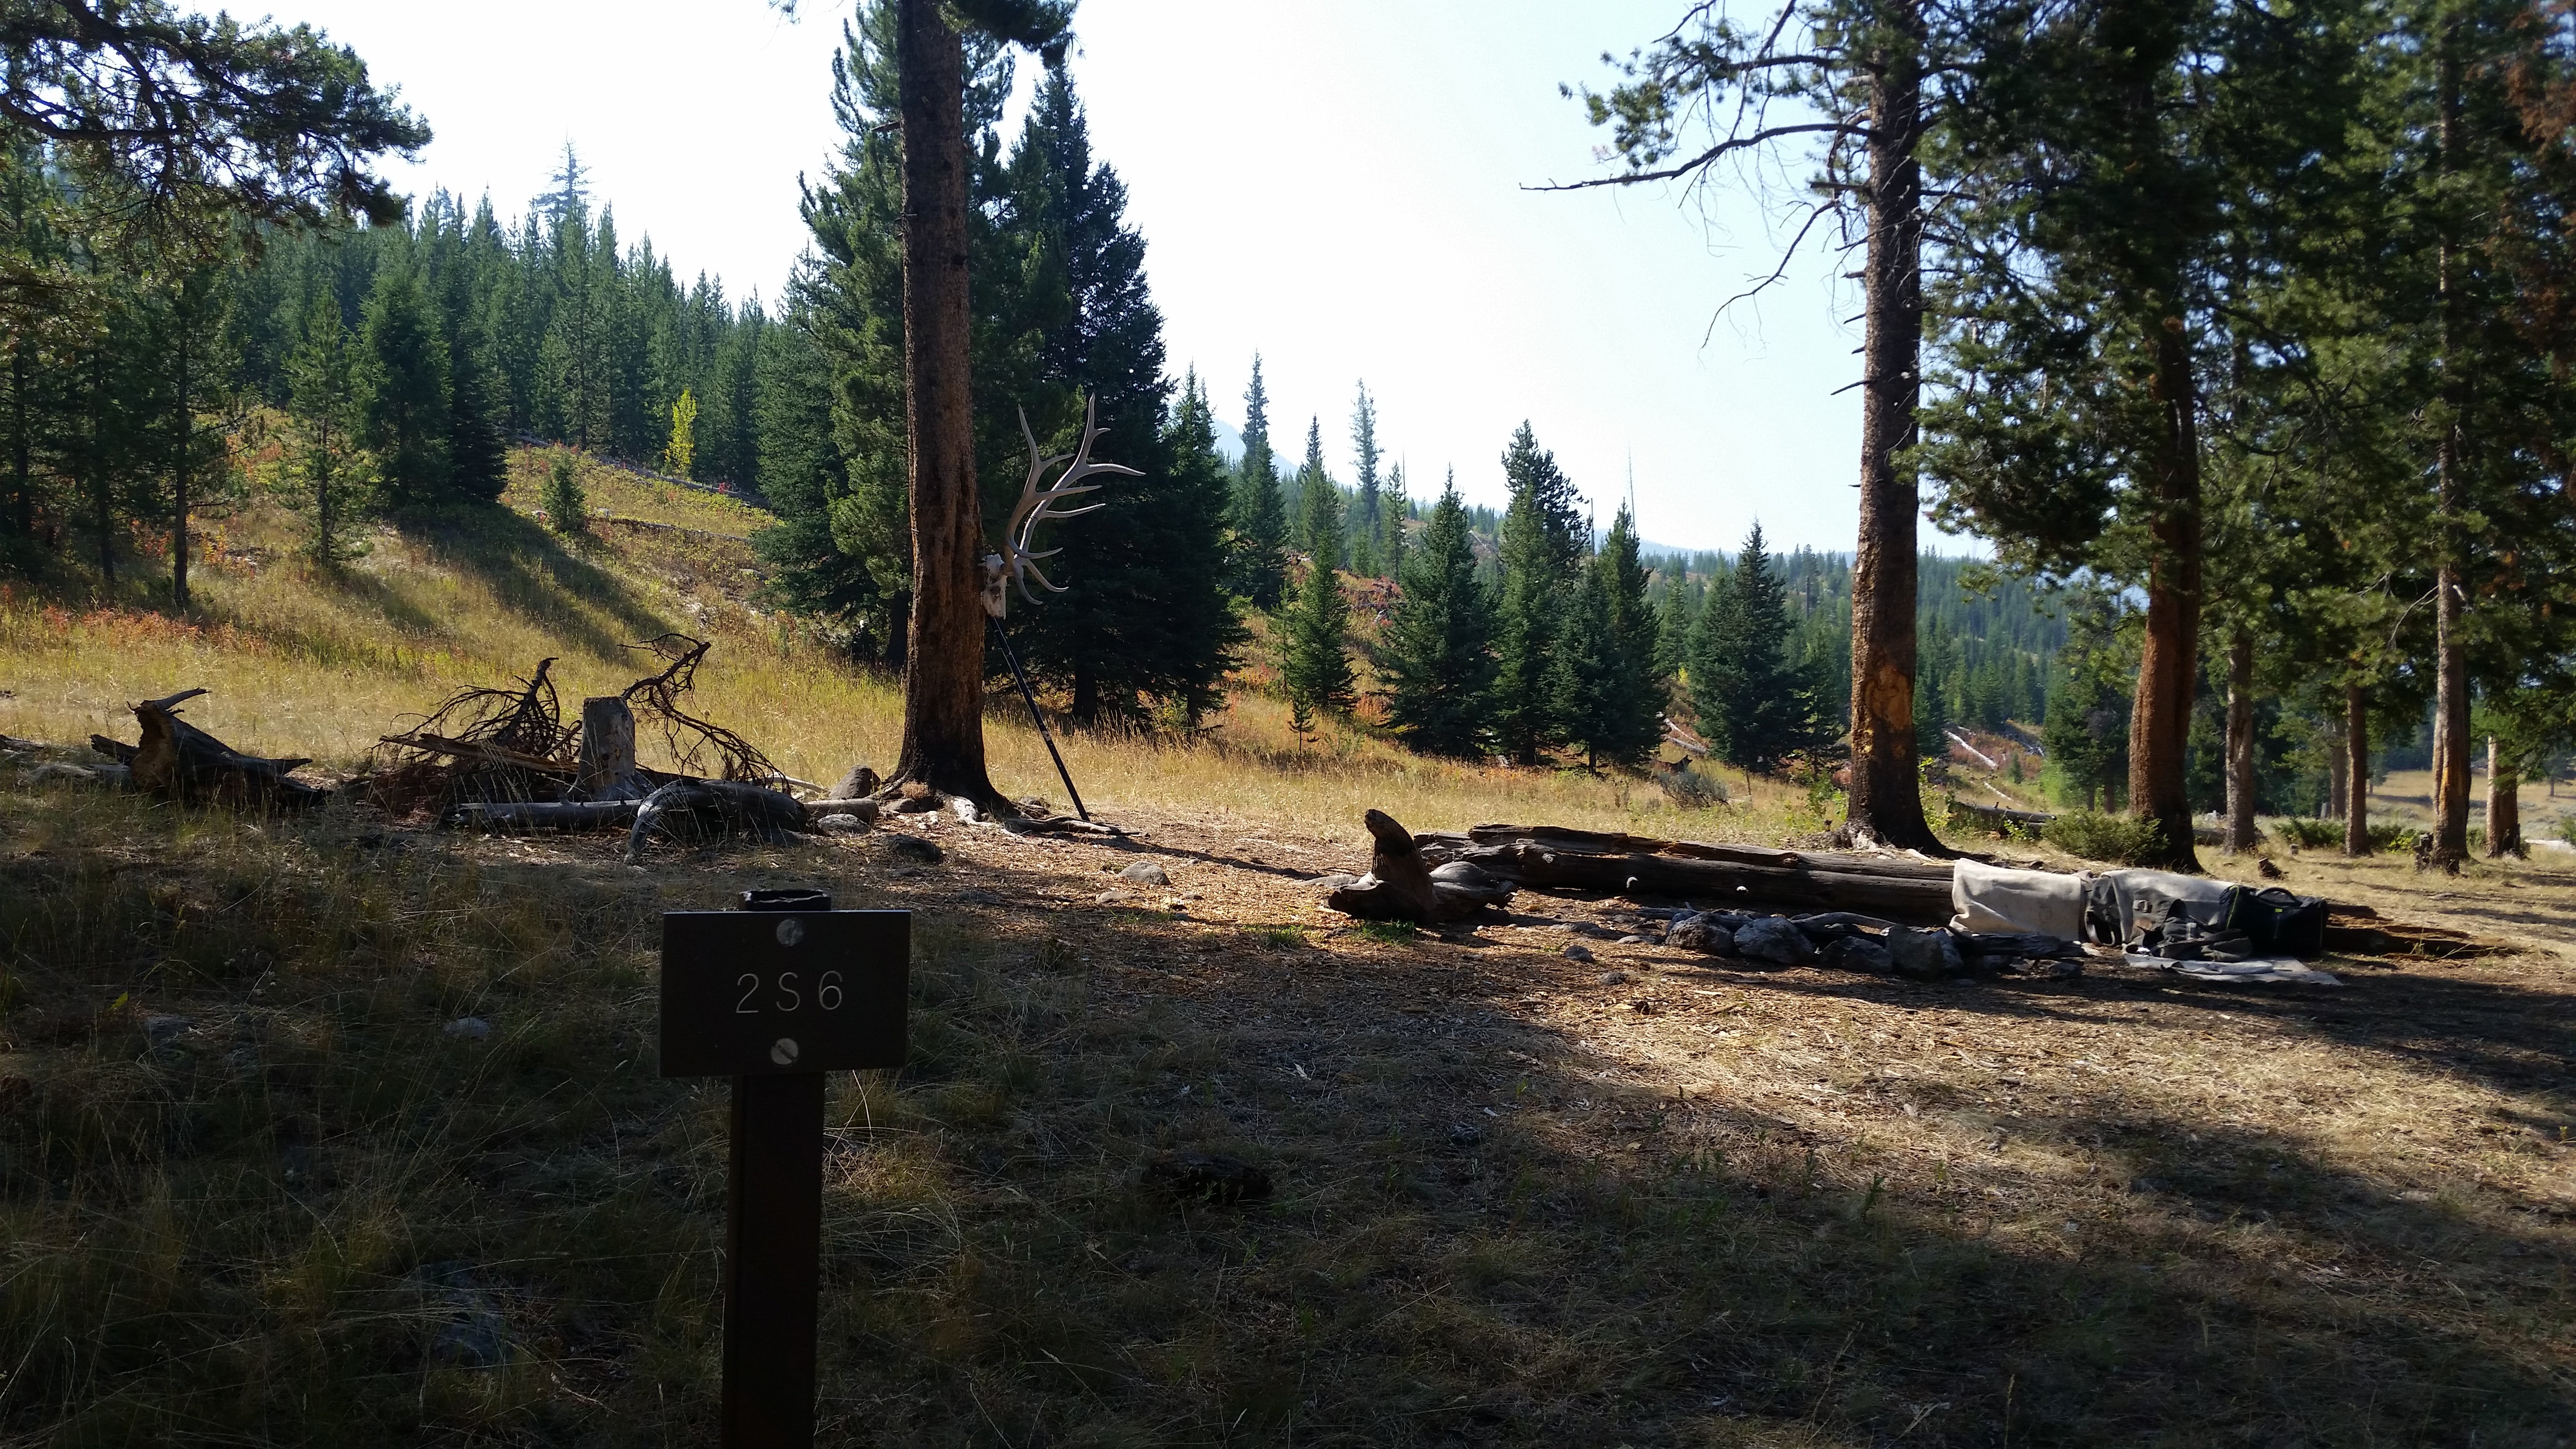 Camper submitted image from 2S6 Backcountry Campsite — Yellowstone National Park - 2